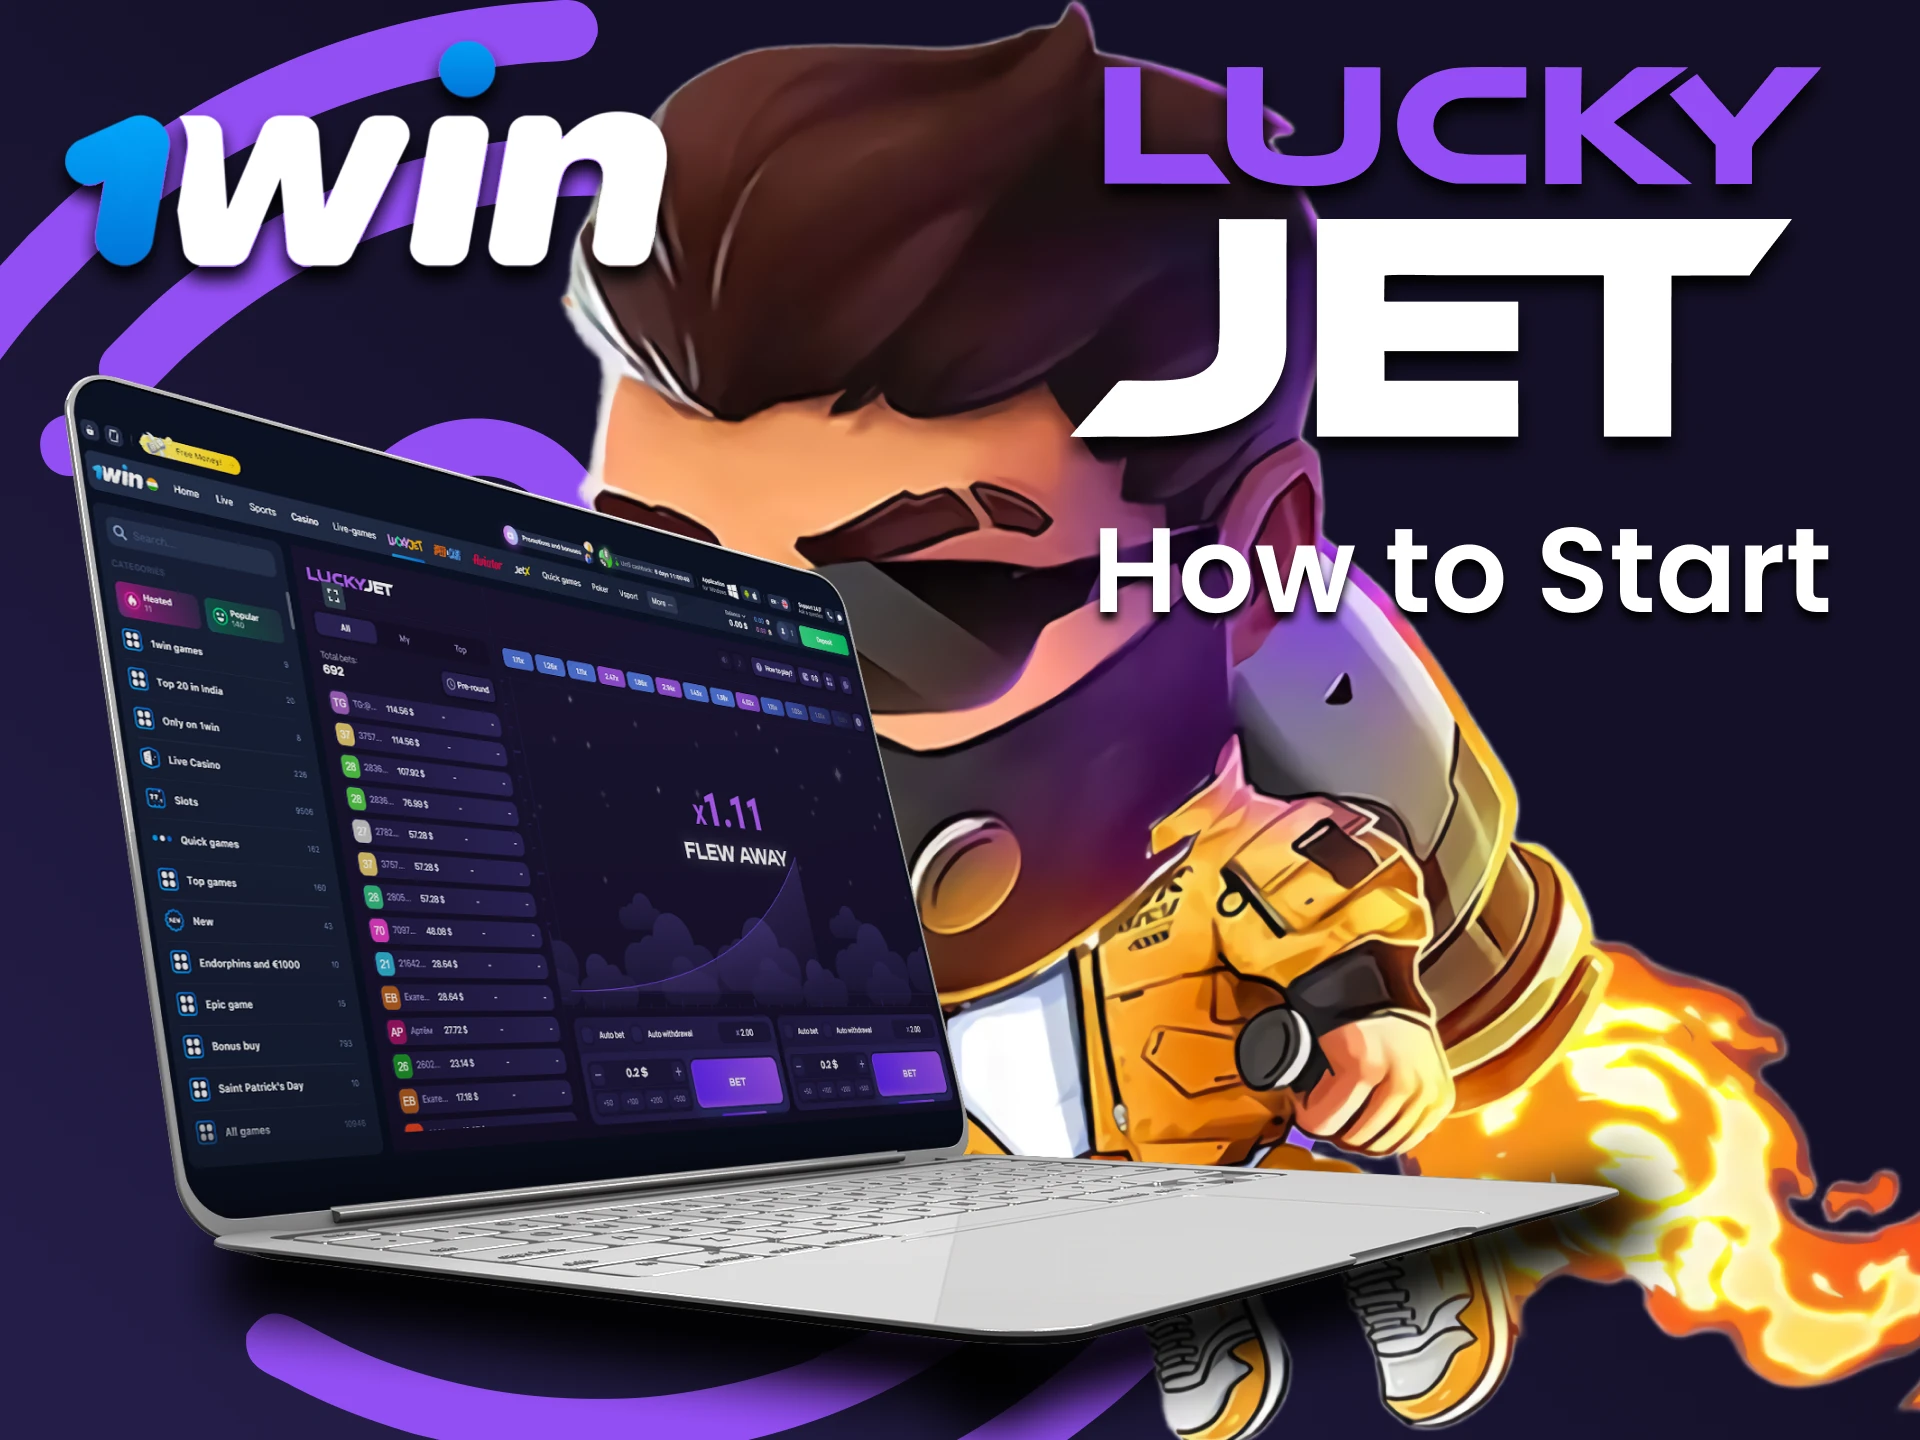 Go to the right section on 1win to play Lucky Jet.